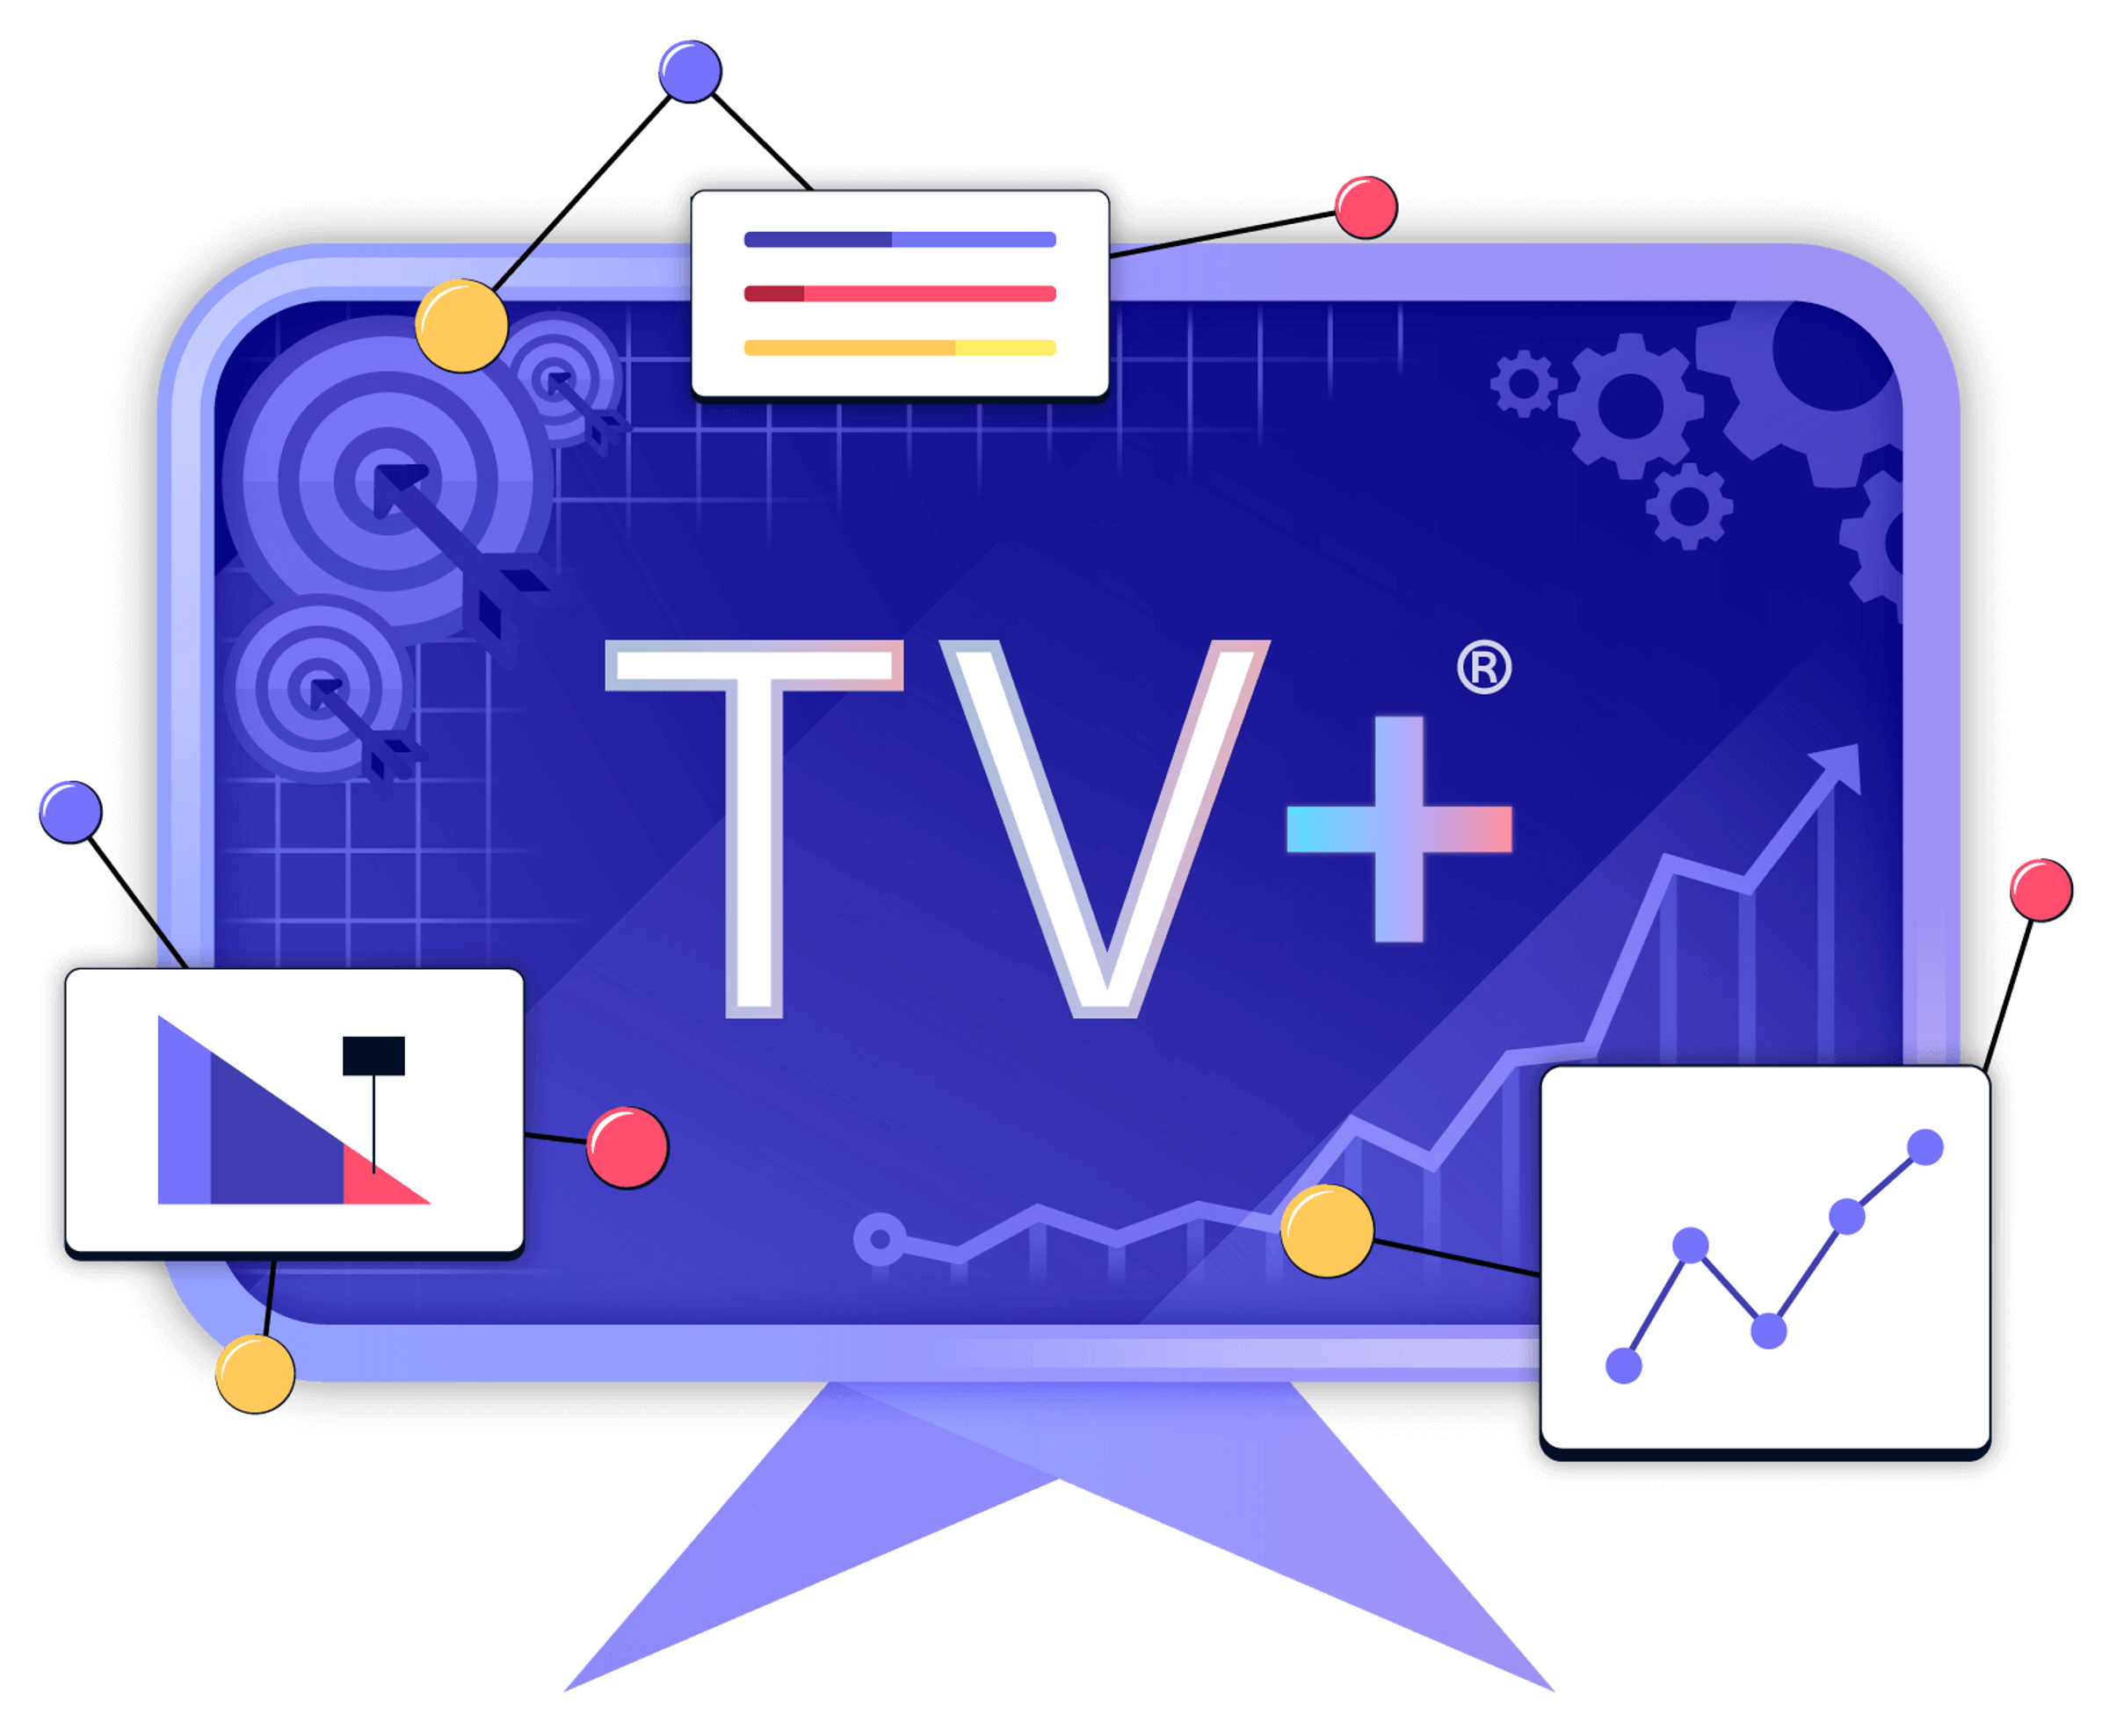 TV+ image with charts and metrics